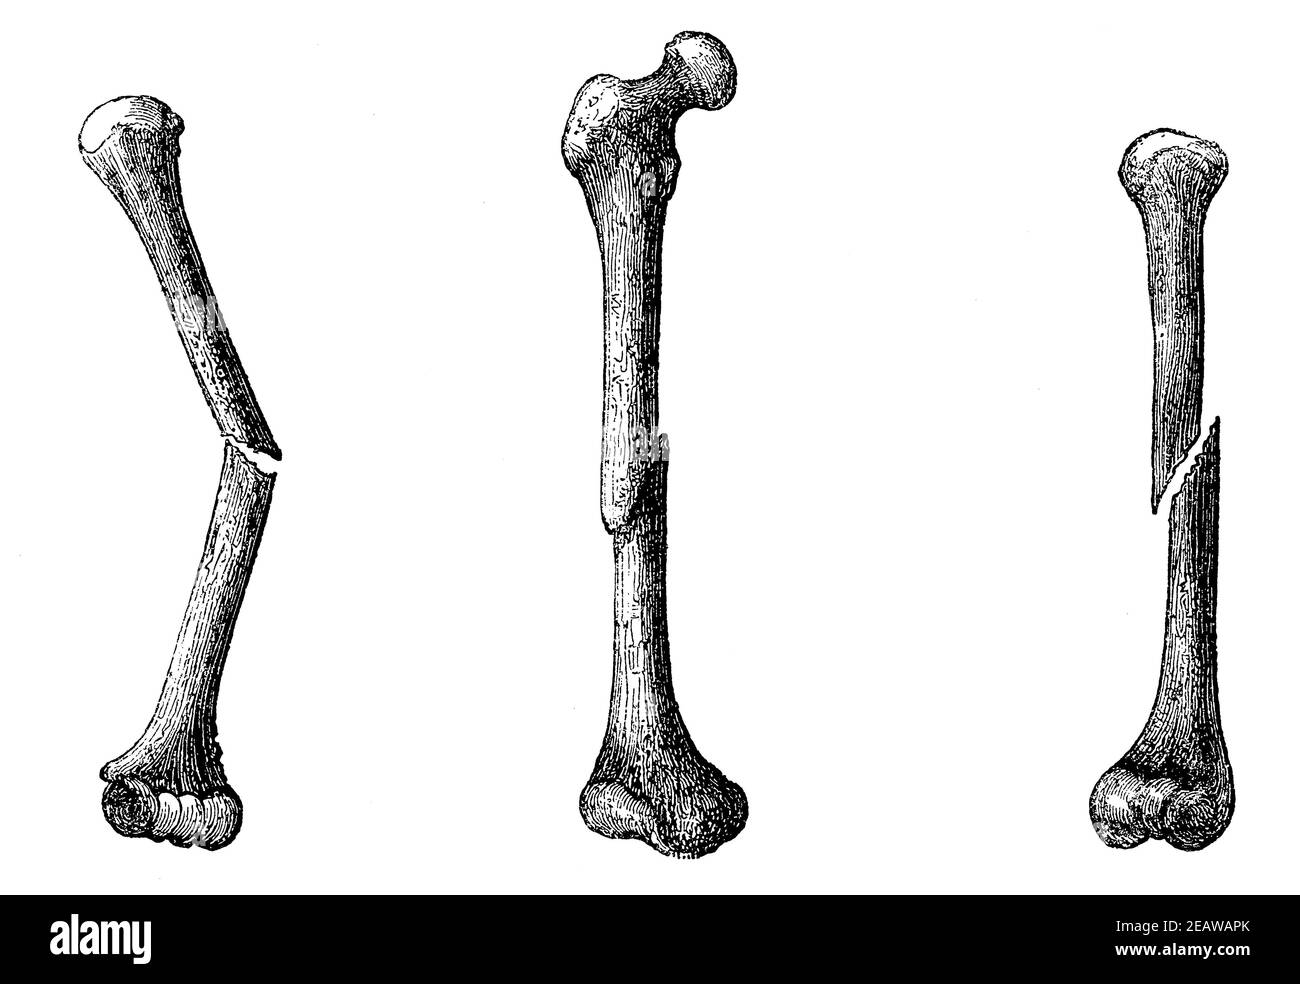 Fracture of the humerus without displacement, fracture of the femur with displacement, fracture of the humerus with displacement and rotation. Illustration of the 19th century. White background. Stock Photo